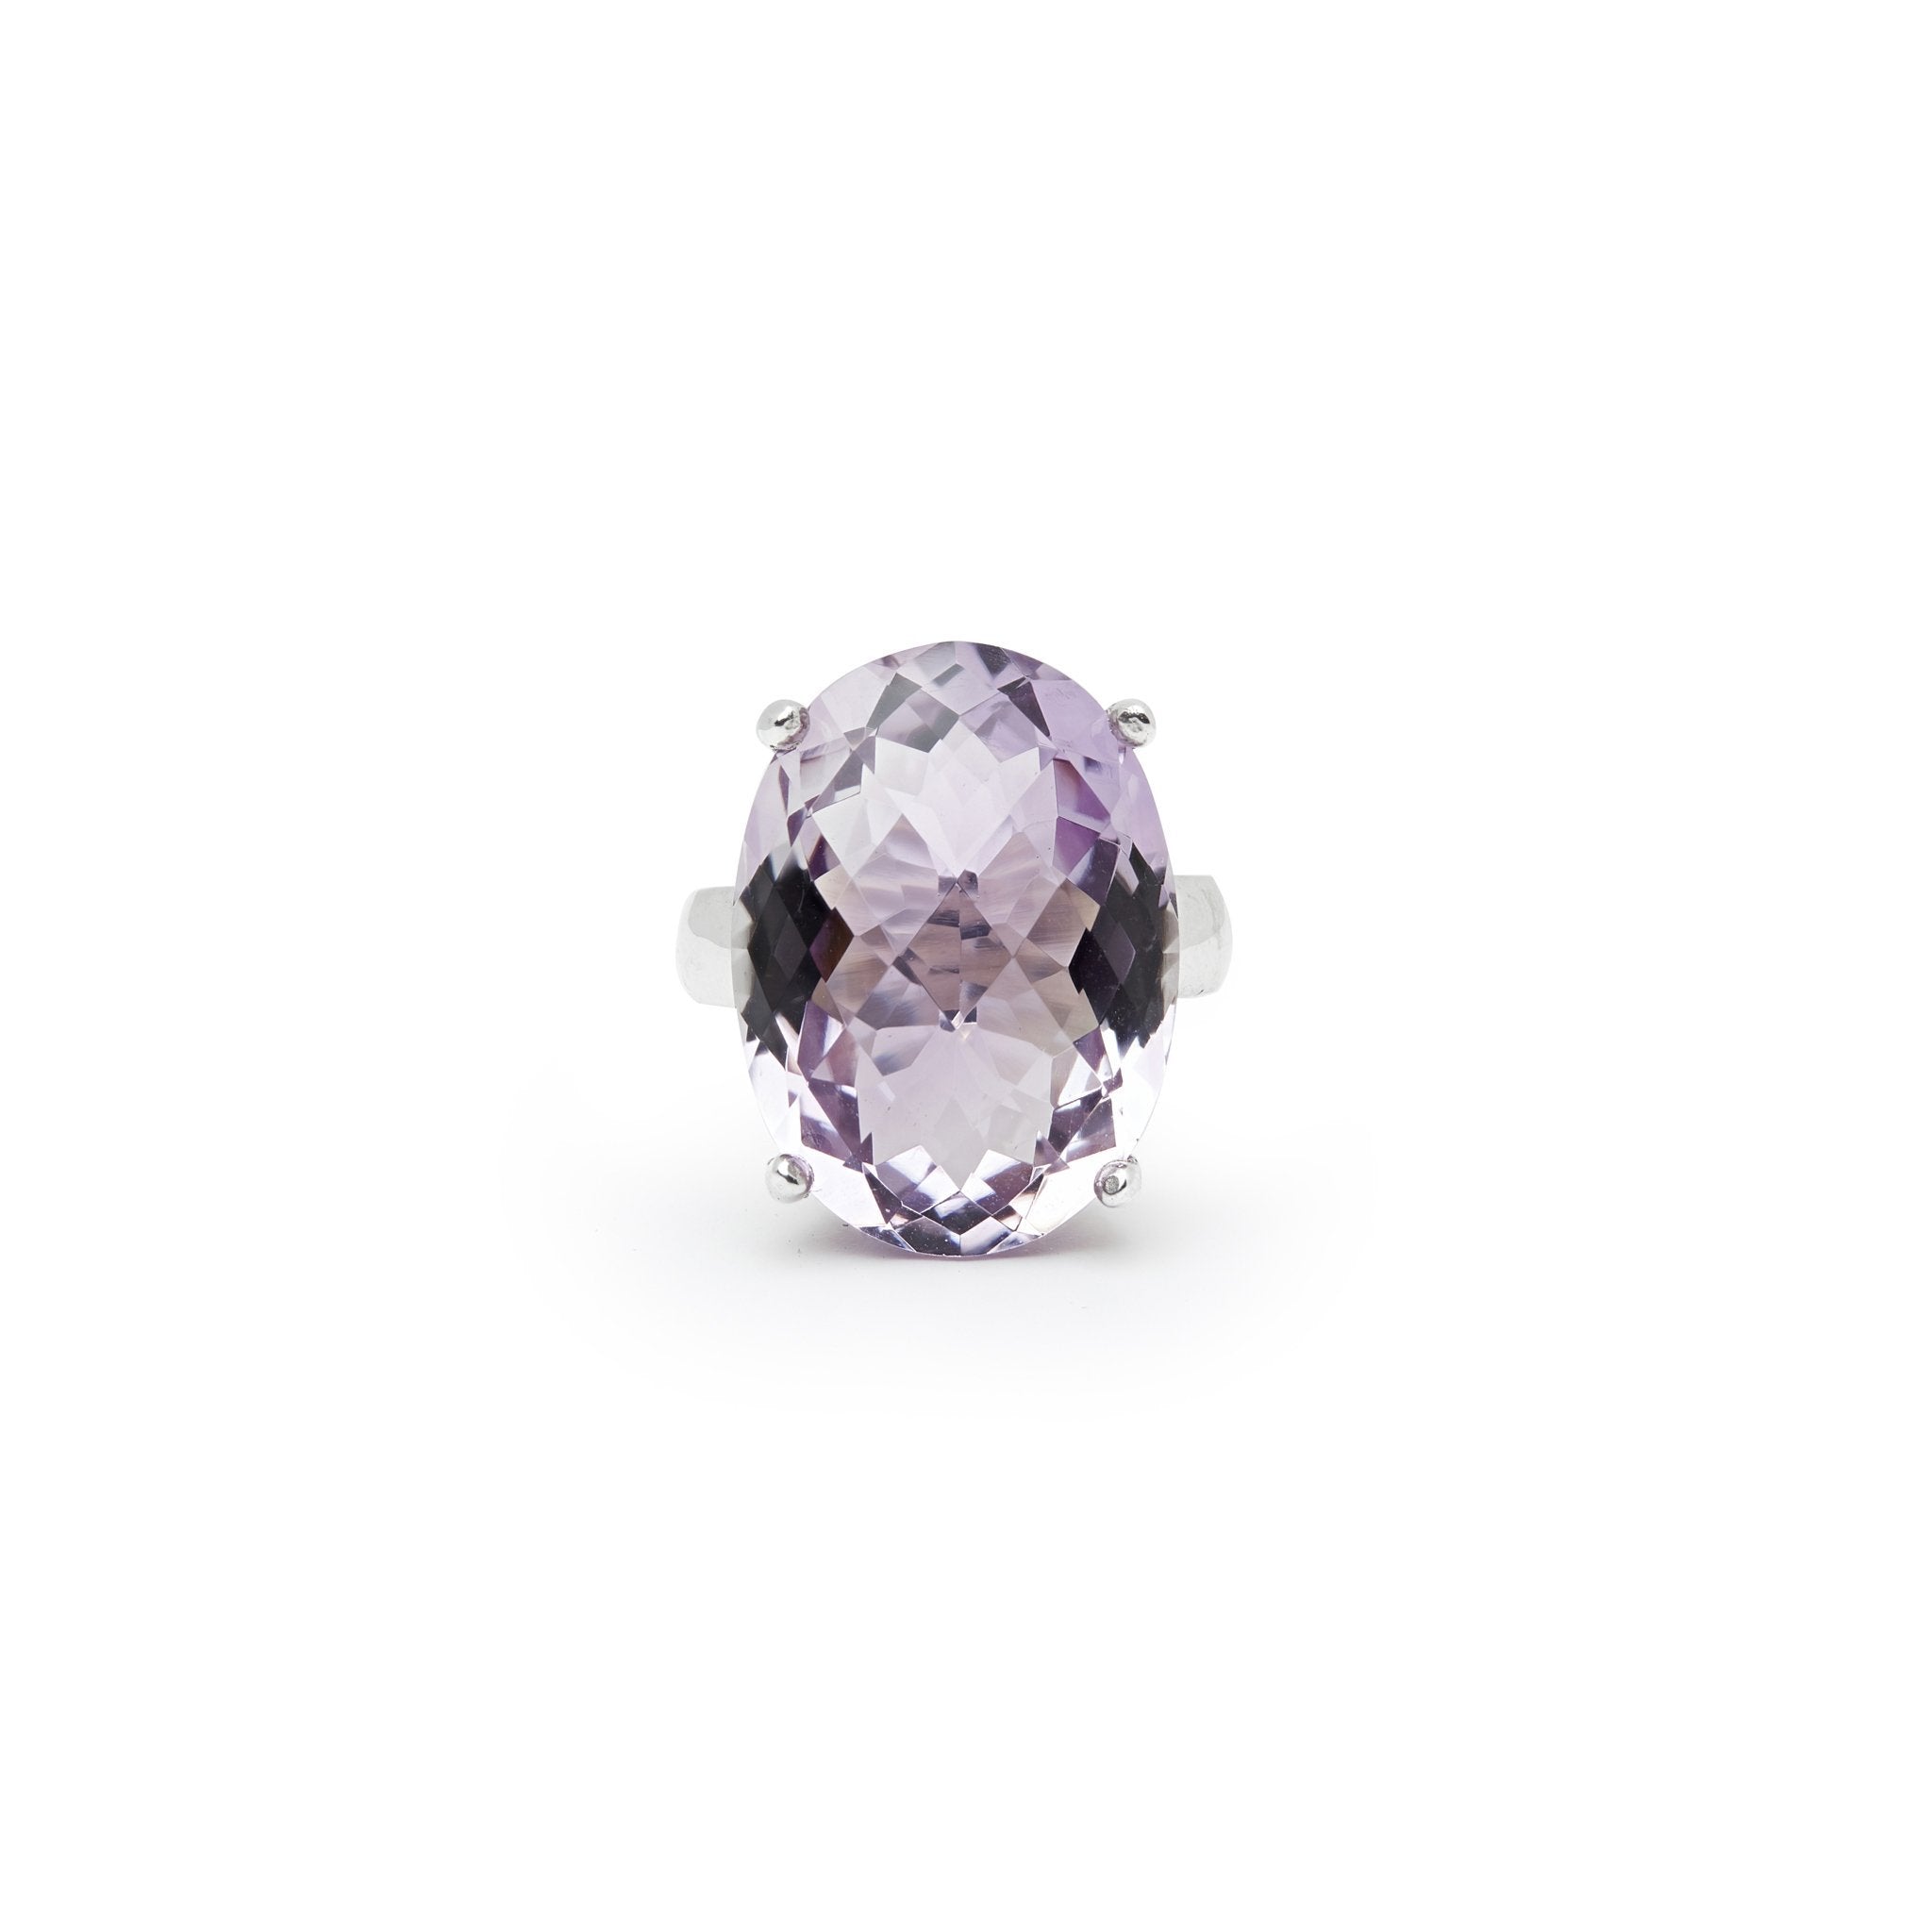 The Renaissance Cocktail ring in purple amethyst - Christelle Chamberland